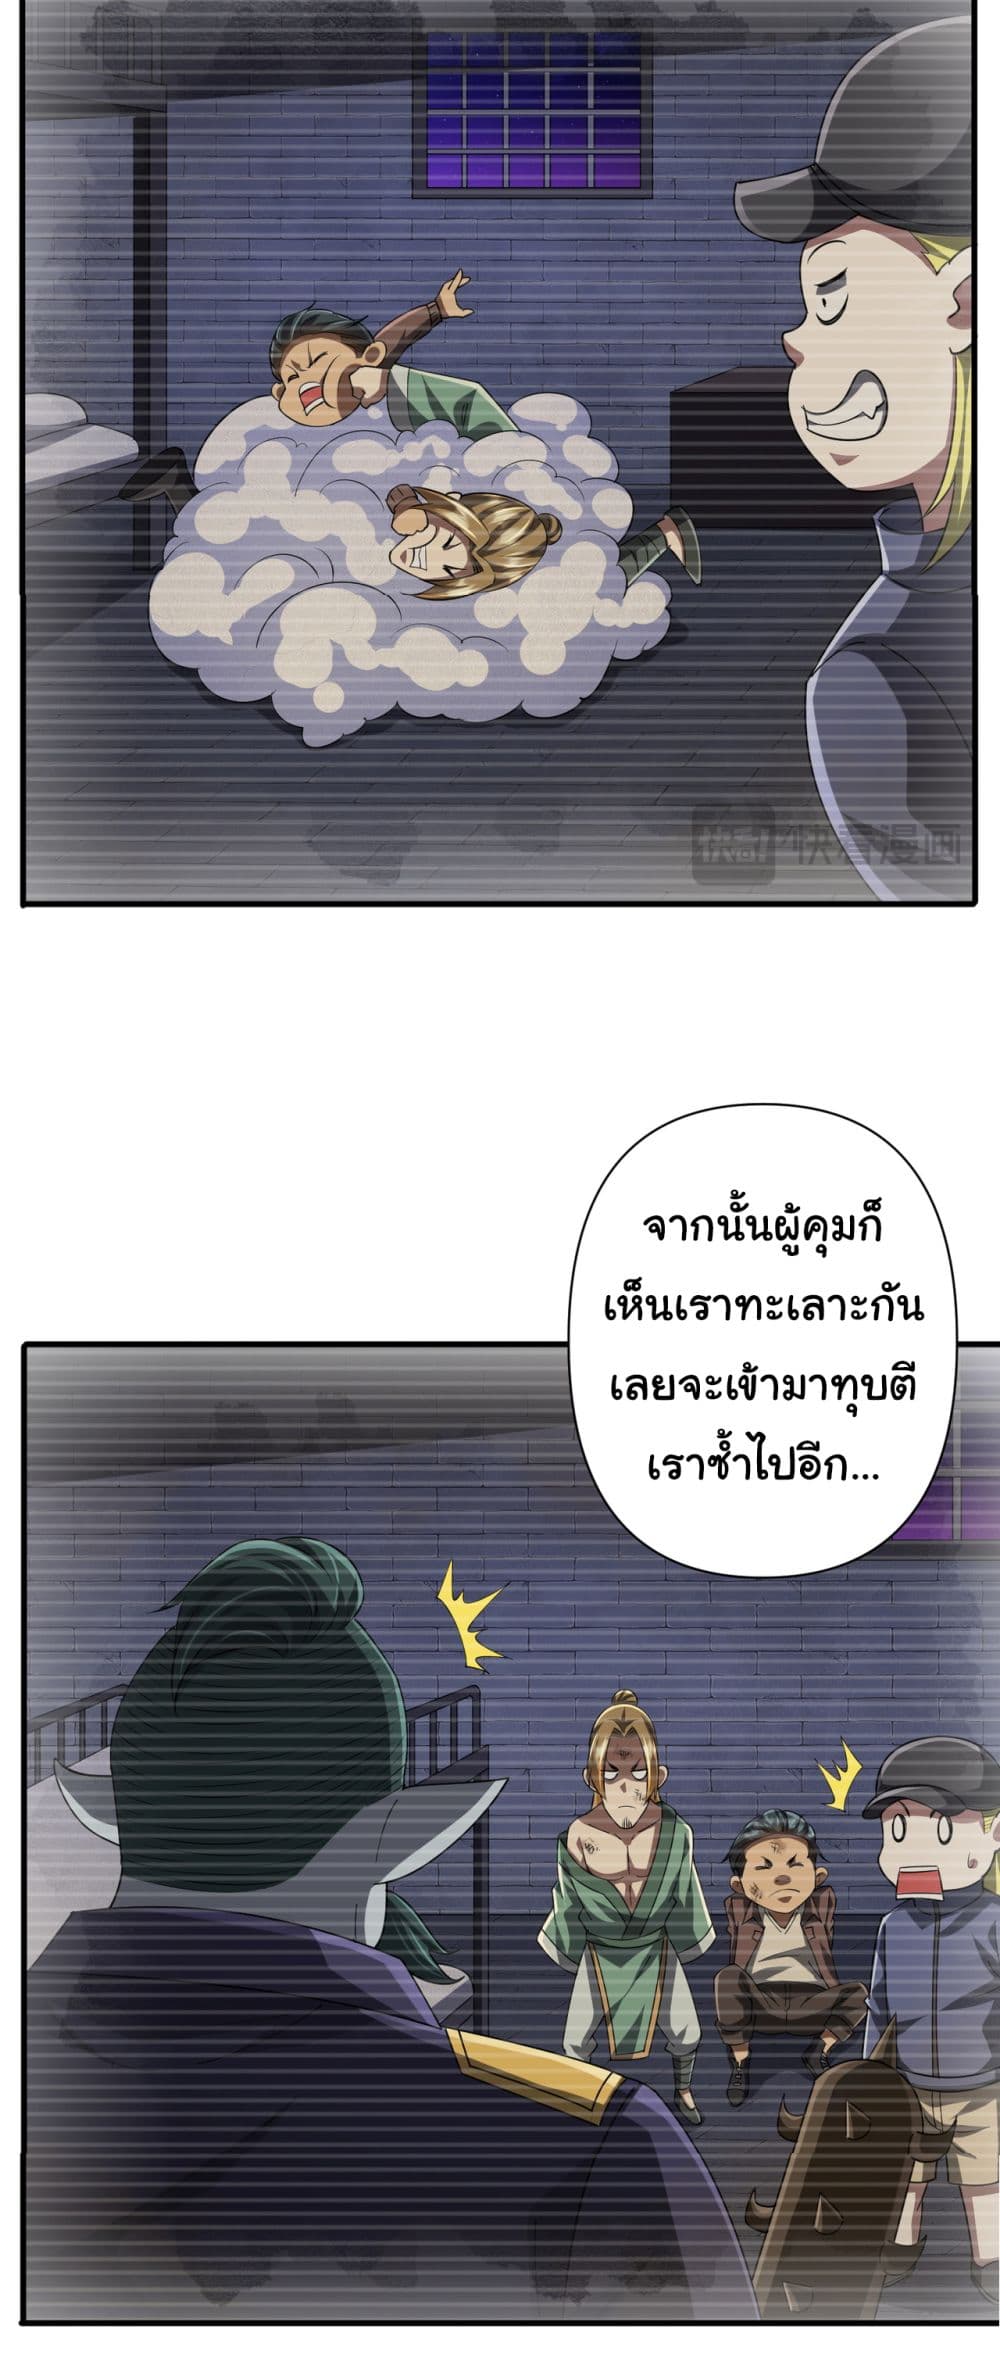 Start with Trillions of Coins ตอนที่ 62 (34)